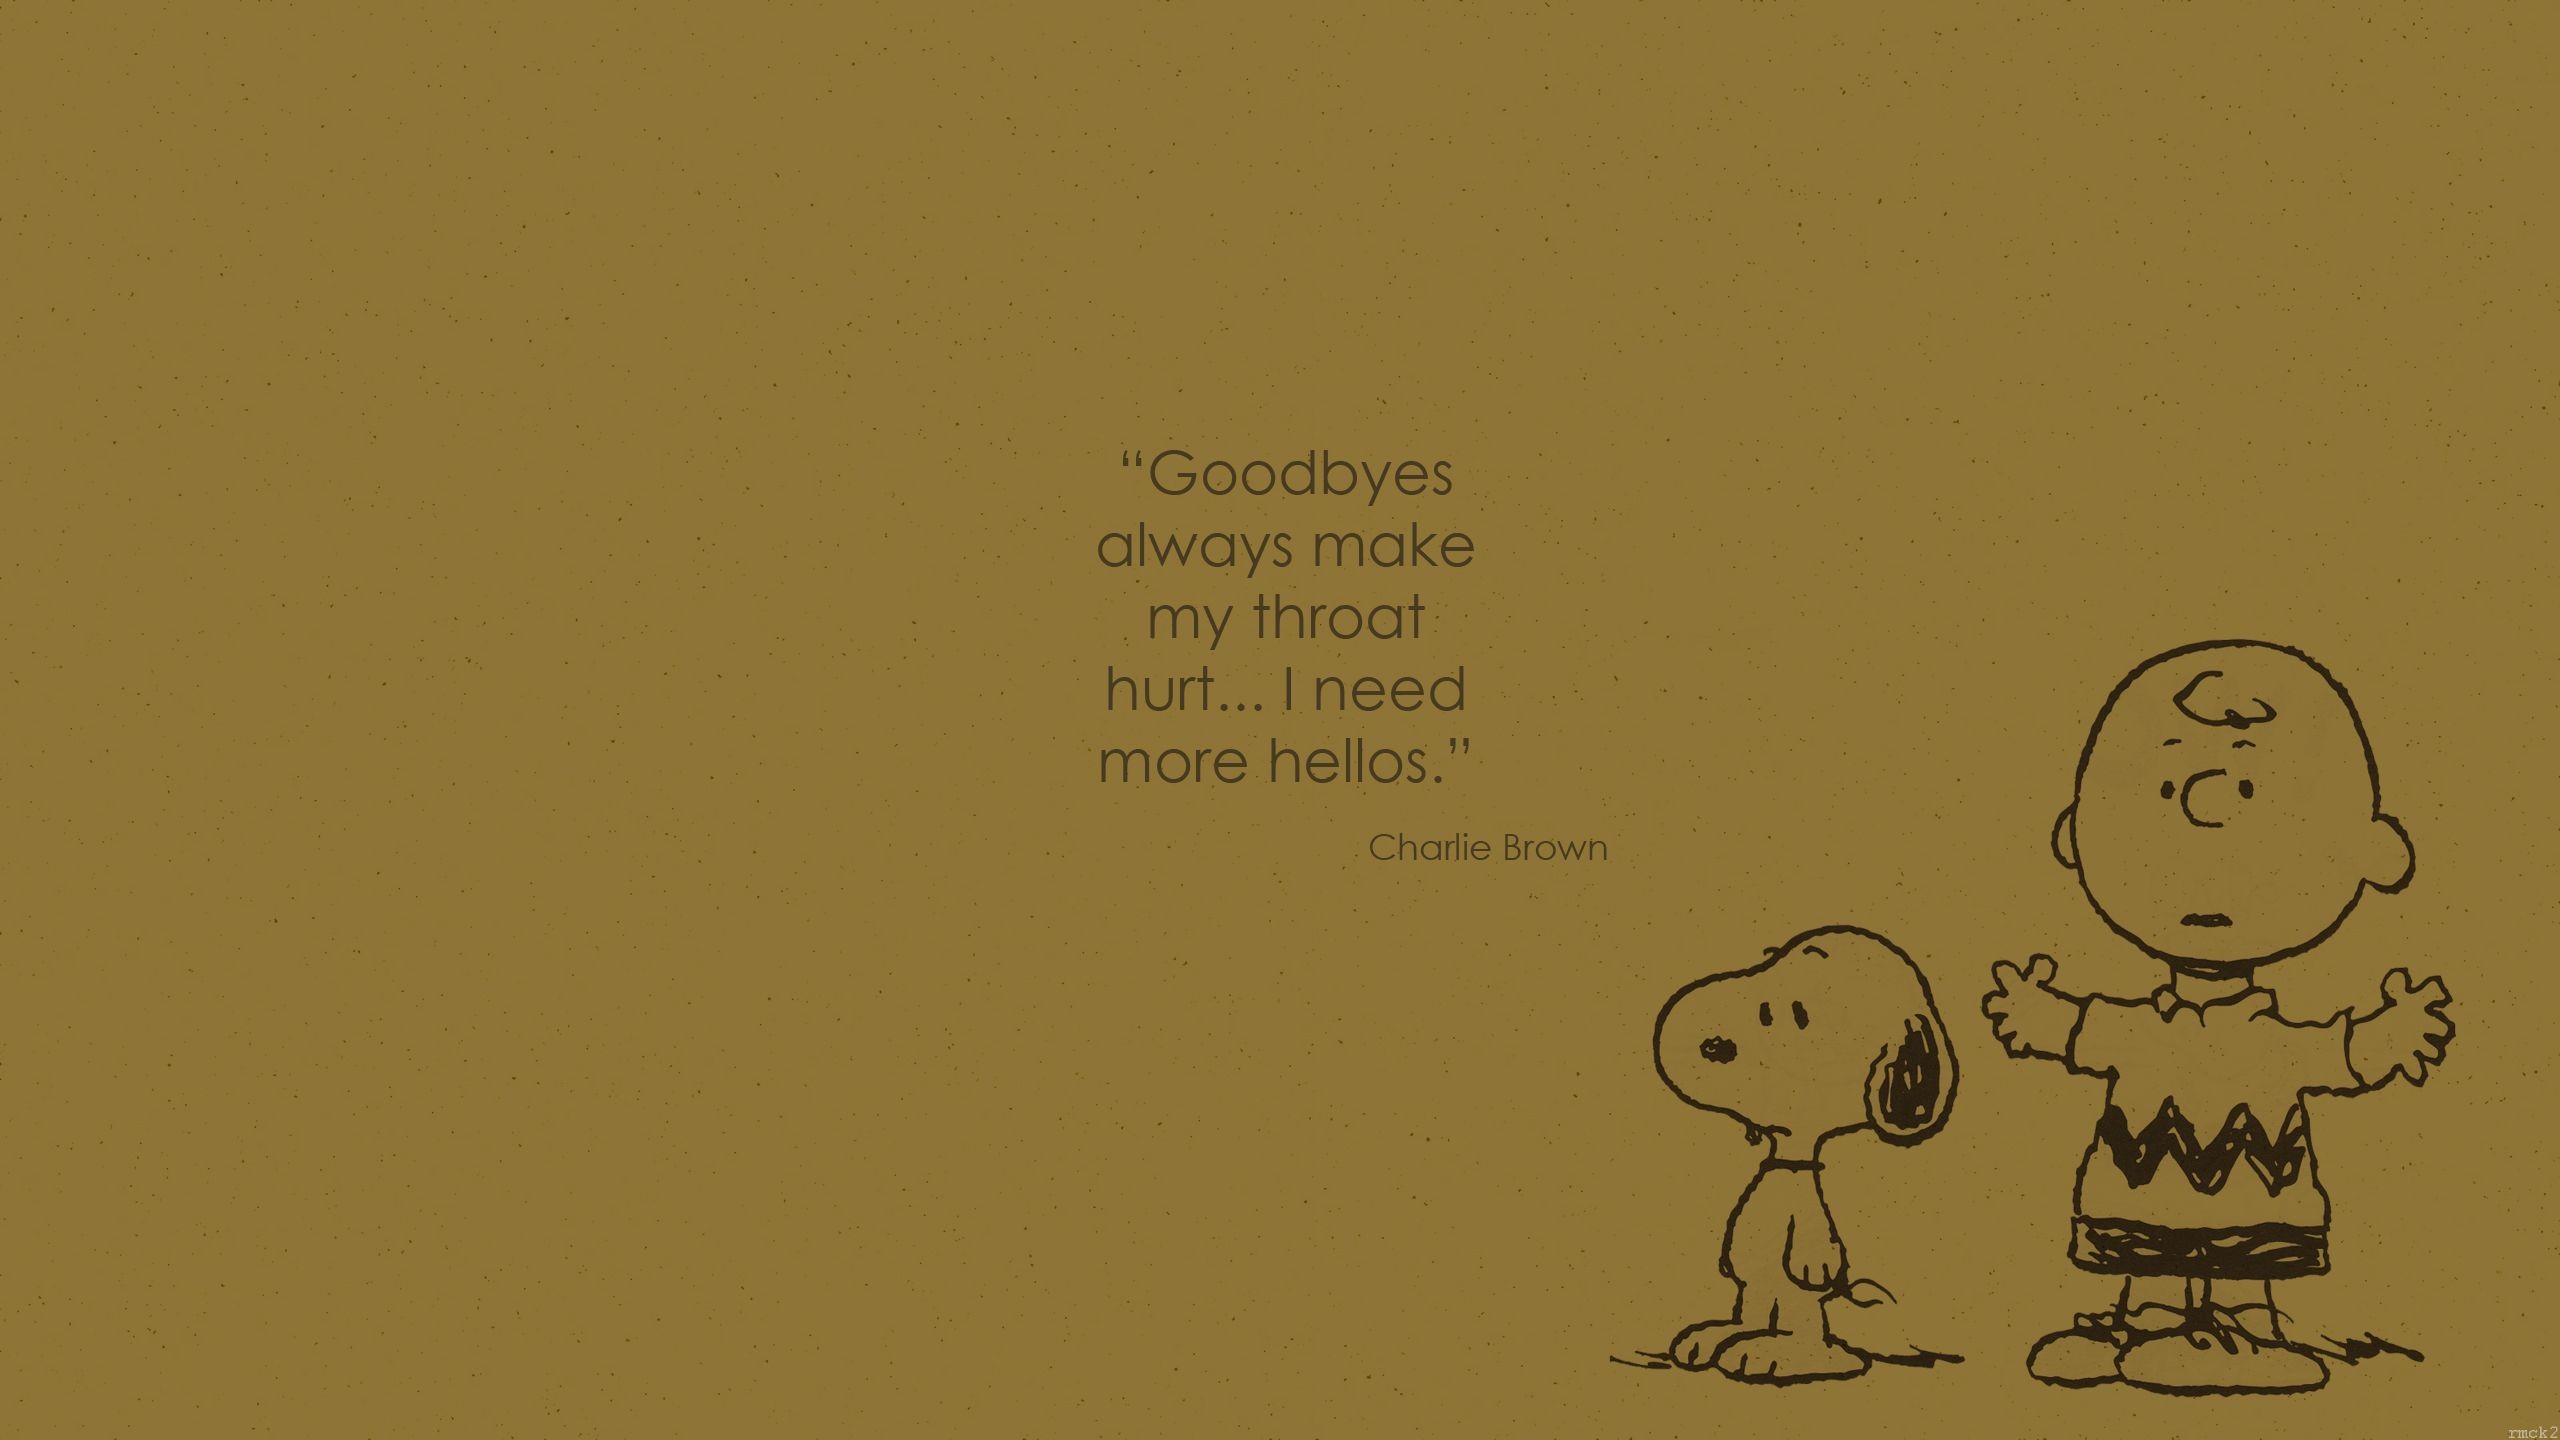 2560x1440 Wallpaper Charlie Brown quote 1 by rmck2 on DeviantArt